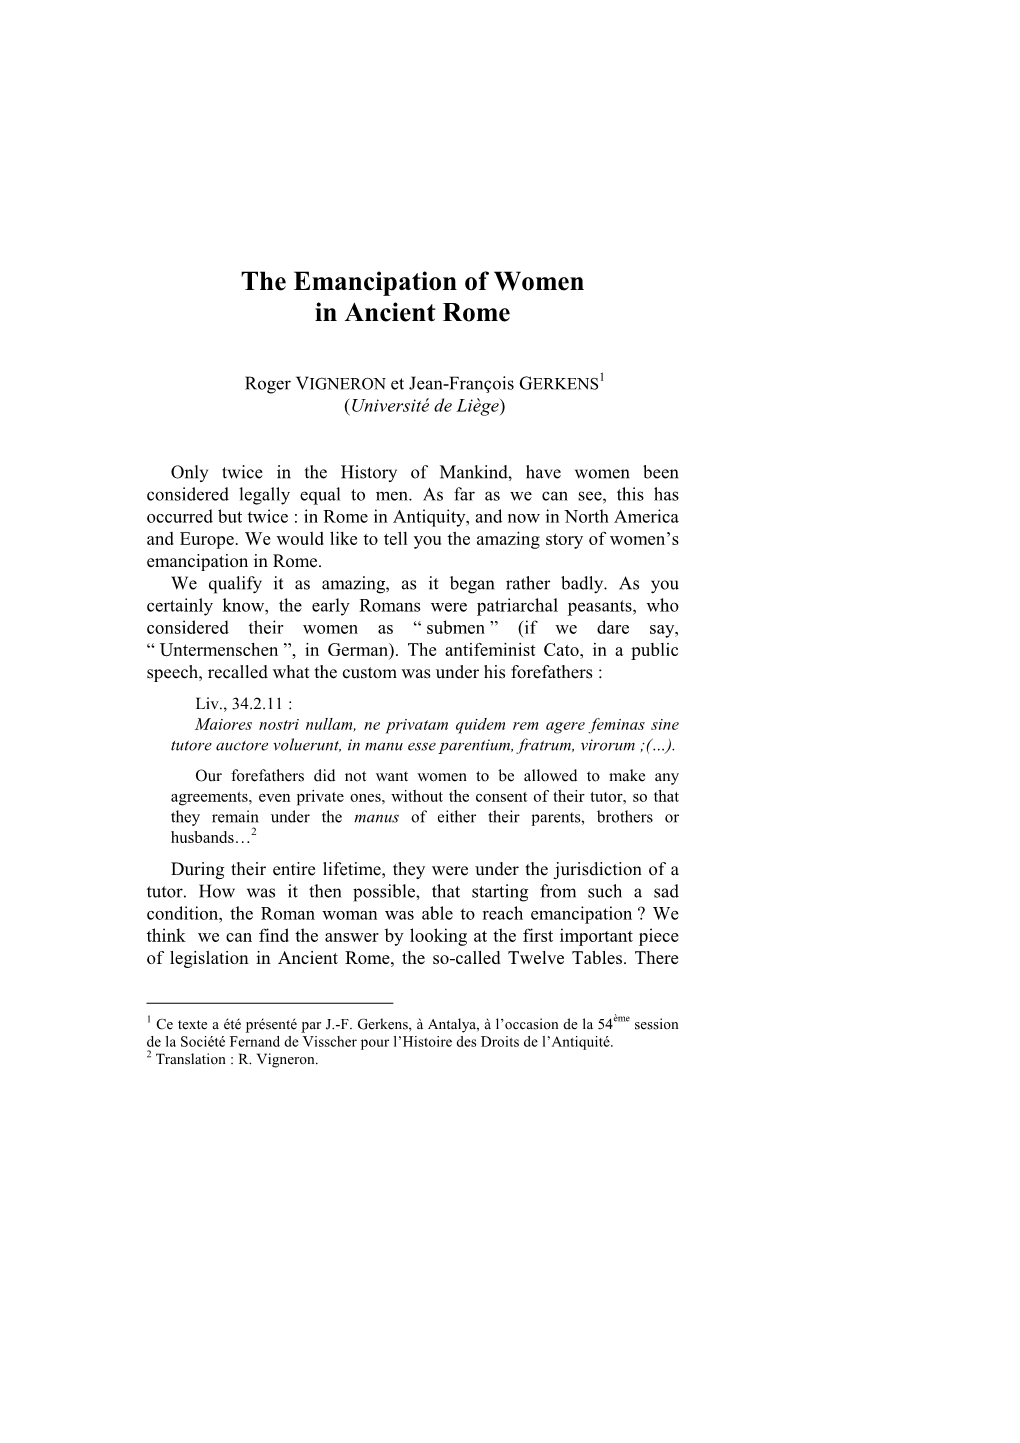 The Emancipation of Women in Ancient Rome